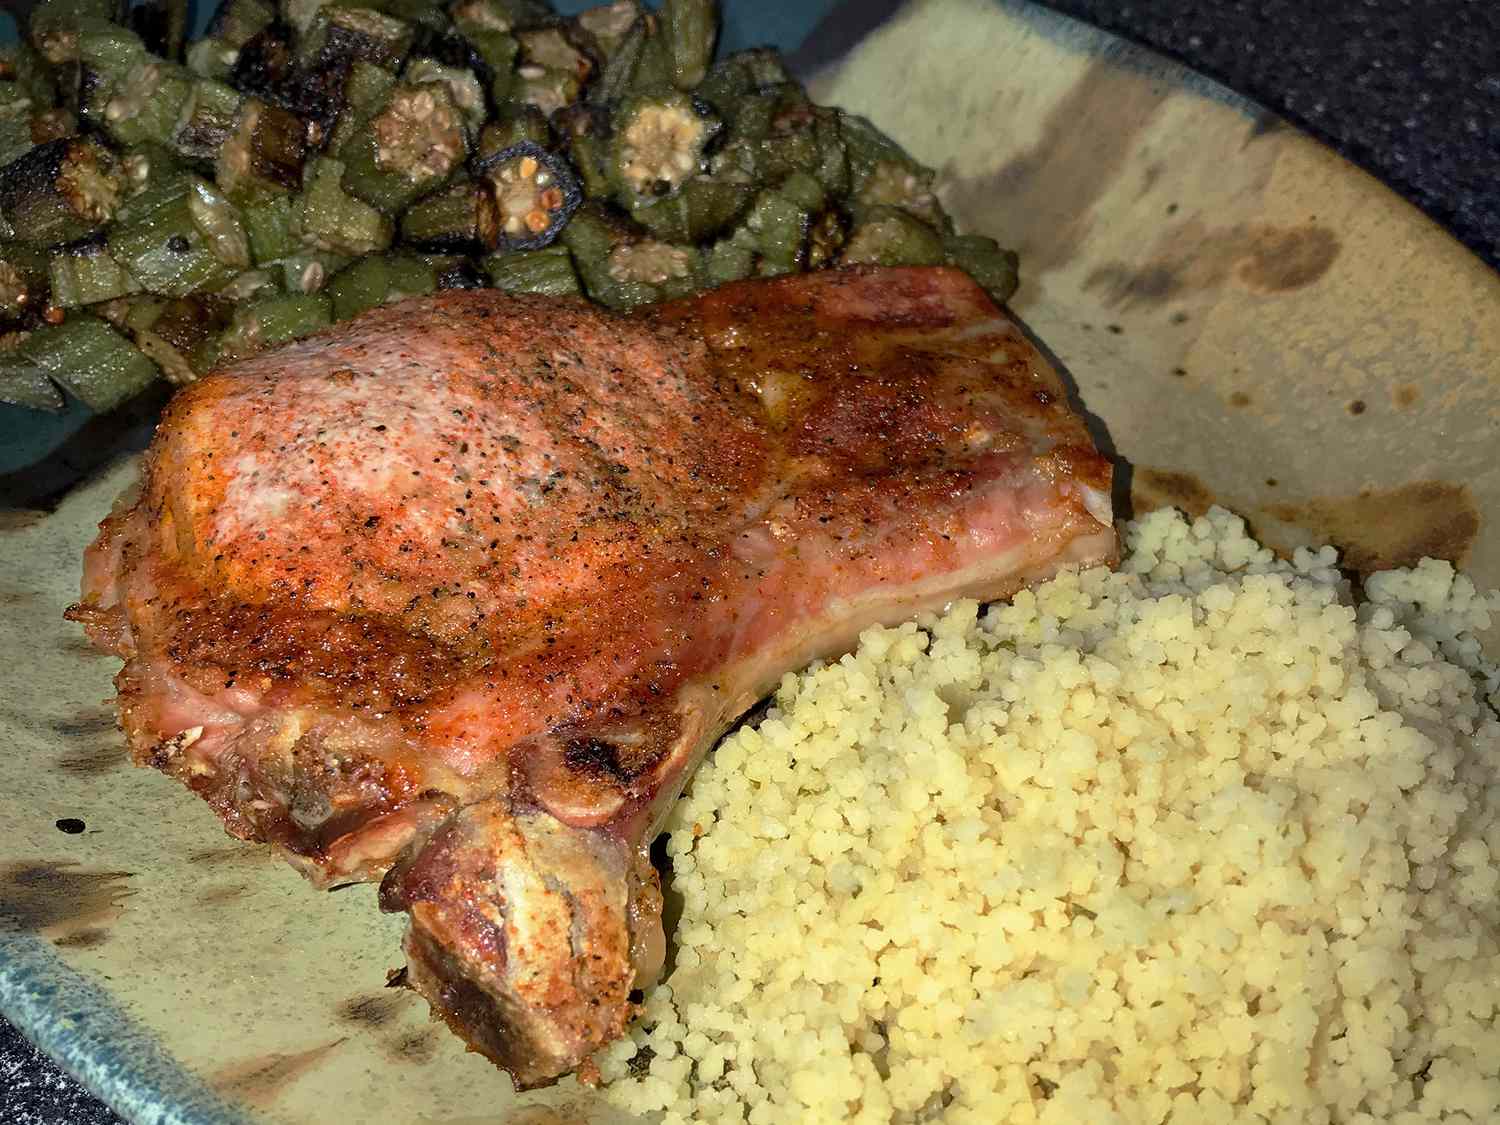 close up view of a baked pork chop, couscous and okra